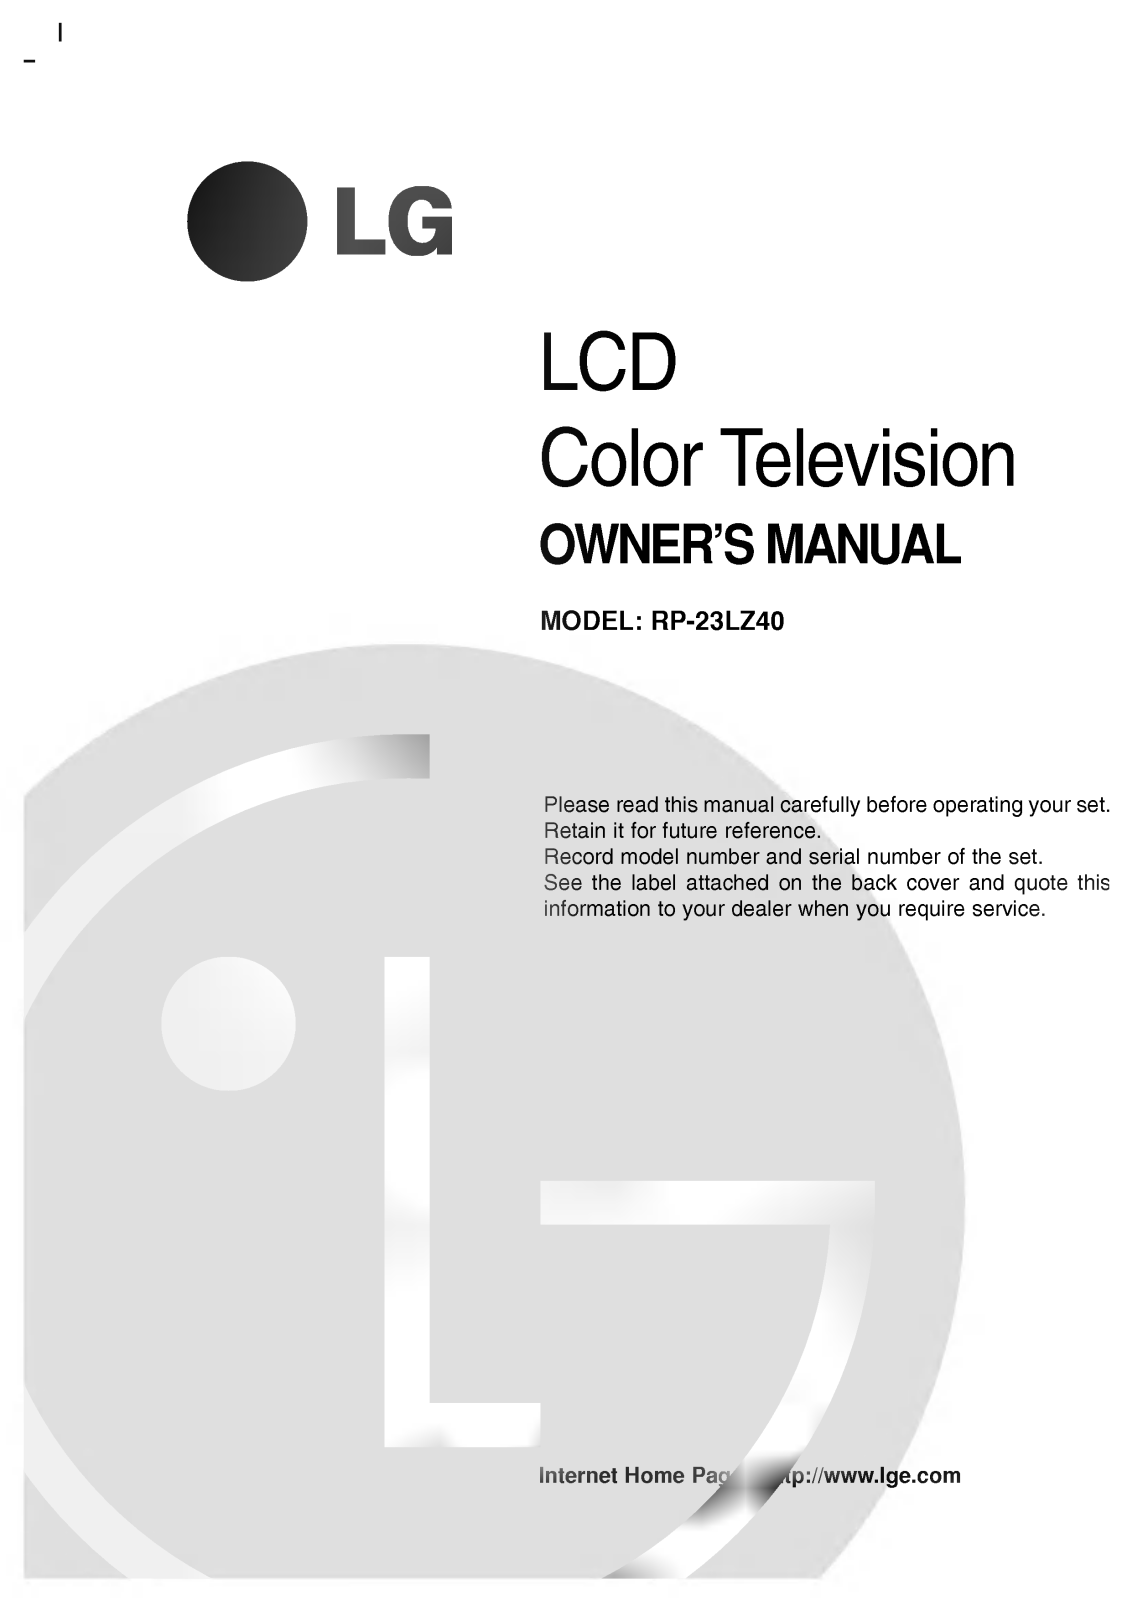 LG RP-23LZ40 Owner's Manual